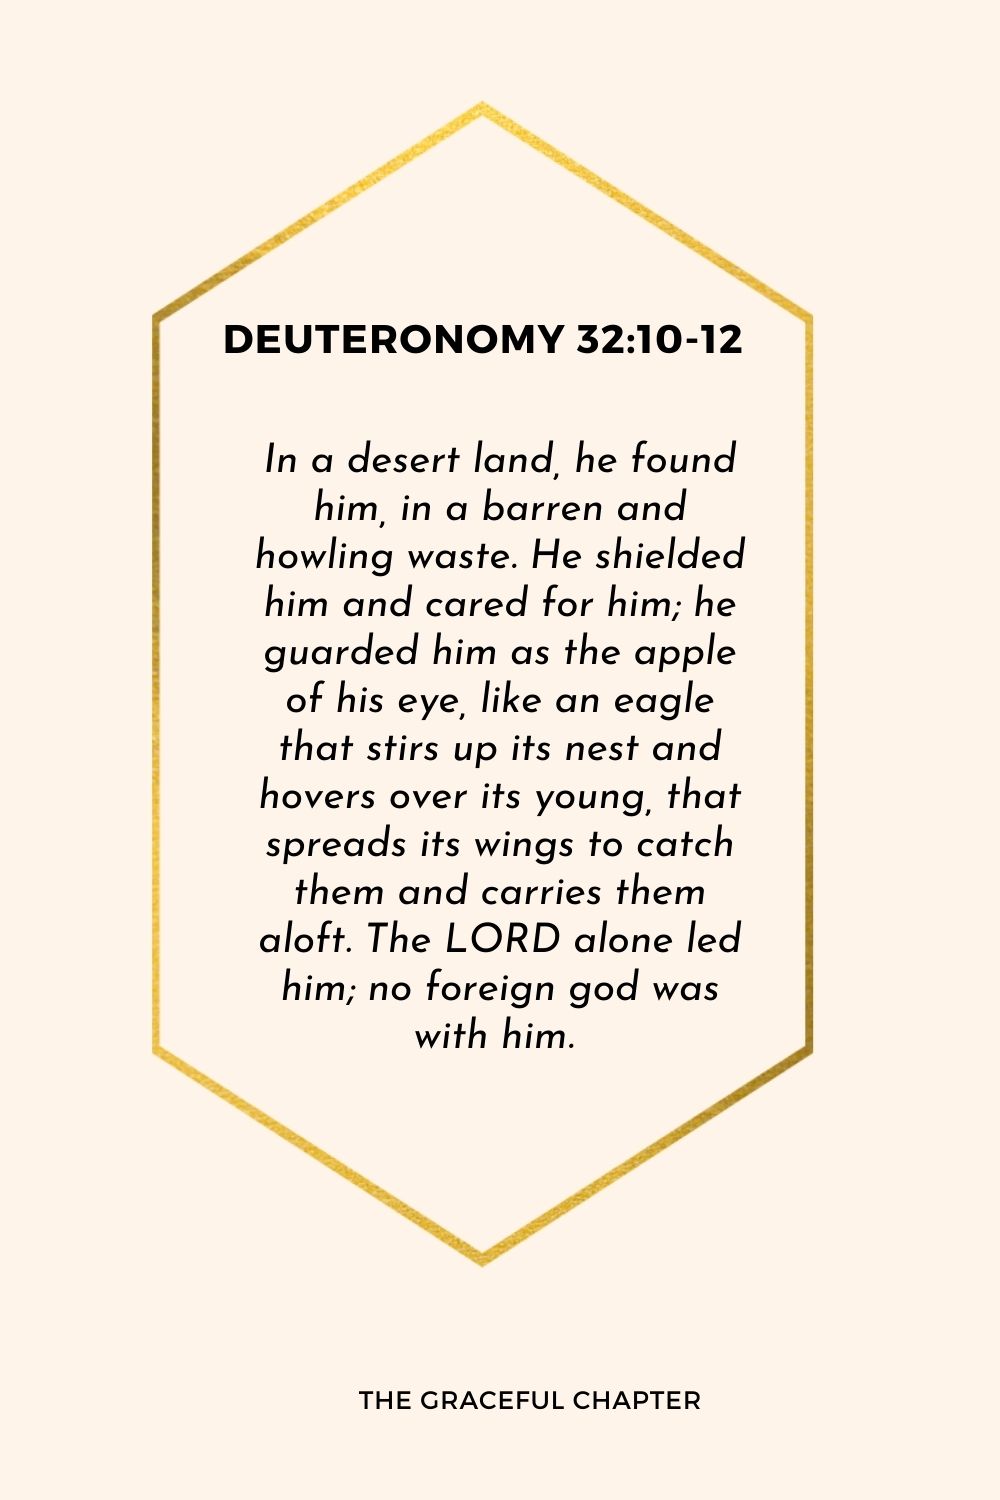 Verse – Deuteronomy 32:10-12 In a desert land, he found him, in a barren and howling waste. He shielded him and cared for him; he guarded him as the apple of his eye, like an eagle that stirs up its nest and hovers over its young, that spreads its wings to catch them and carries them aloft. The LORD alone led him; no foreign god was with him.